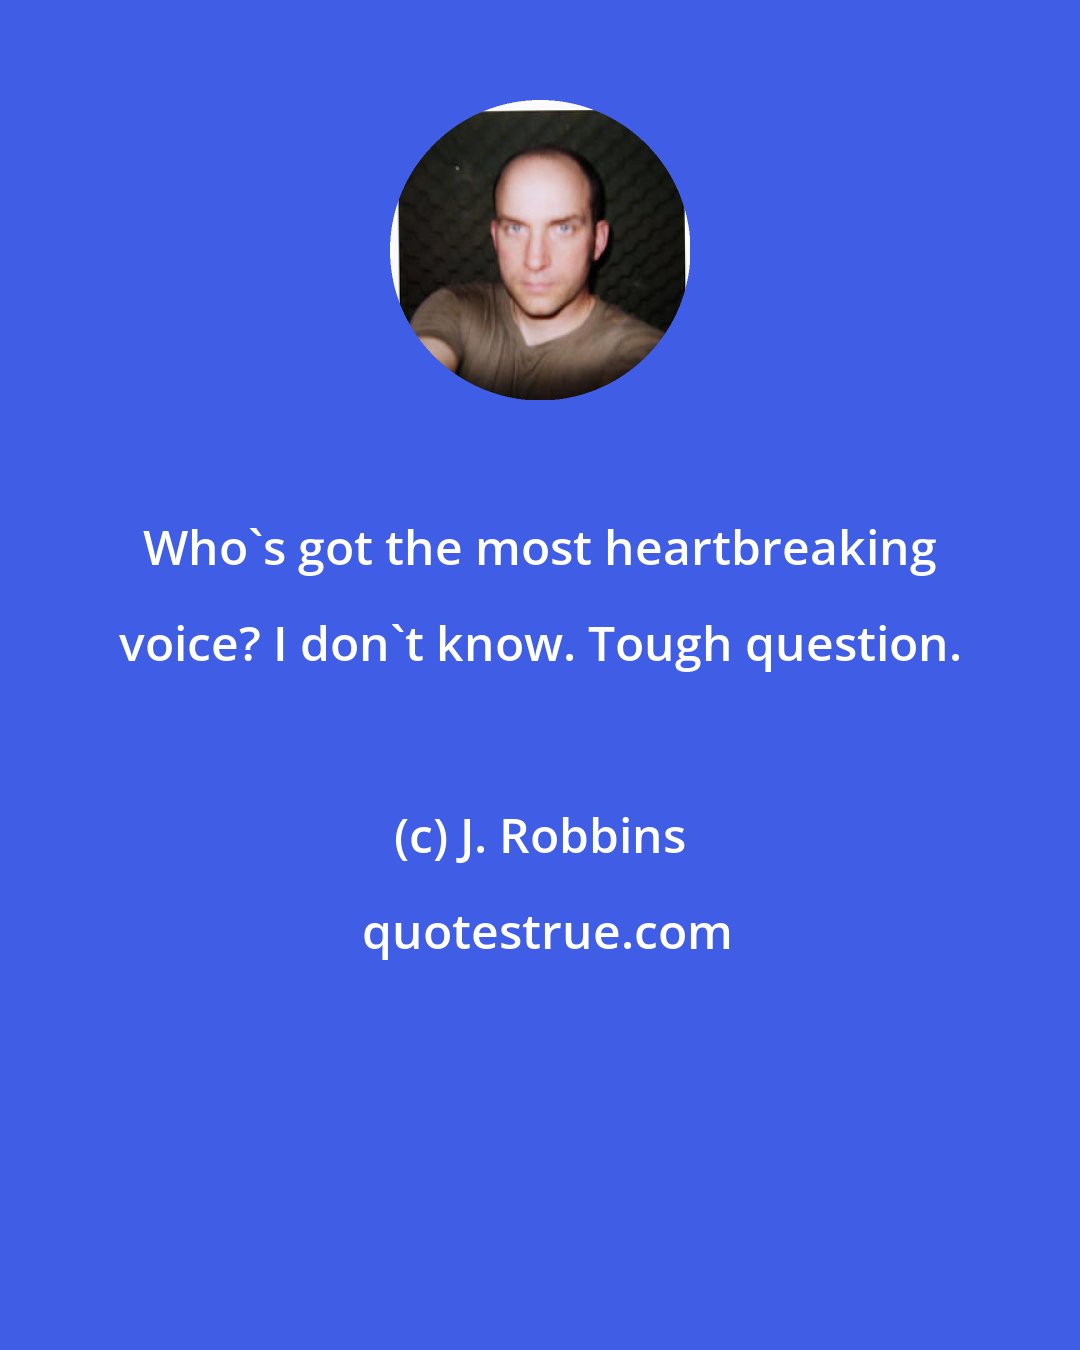 J. Robbins: Who's got the most heartbreaking voice? I don't know. Tough question.